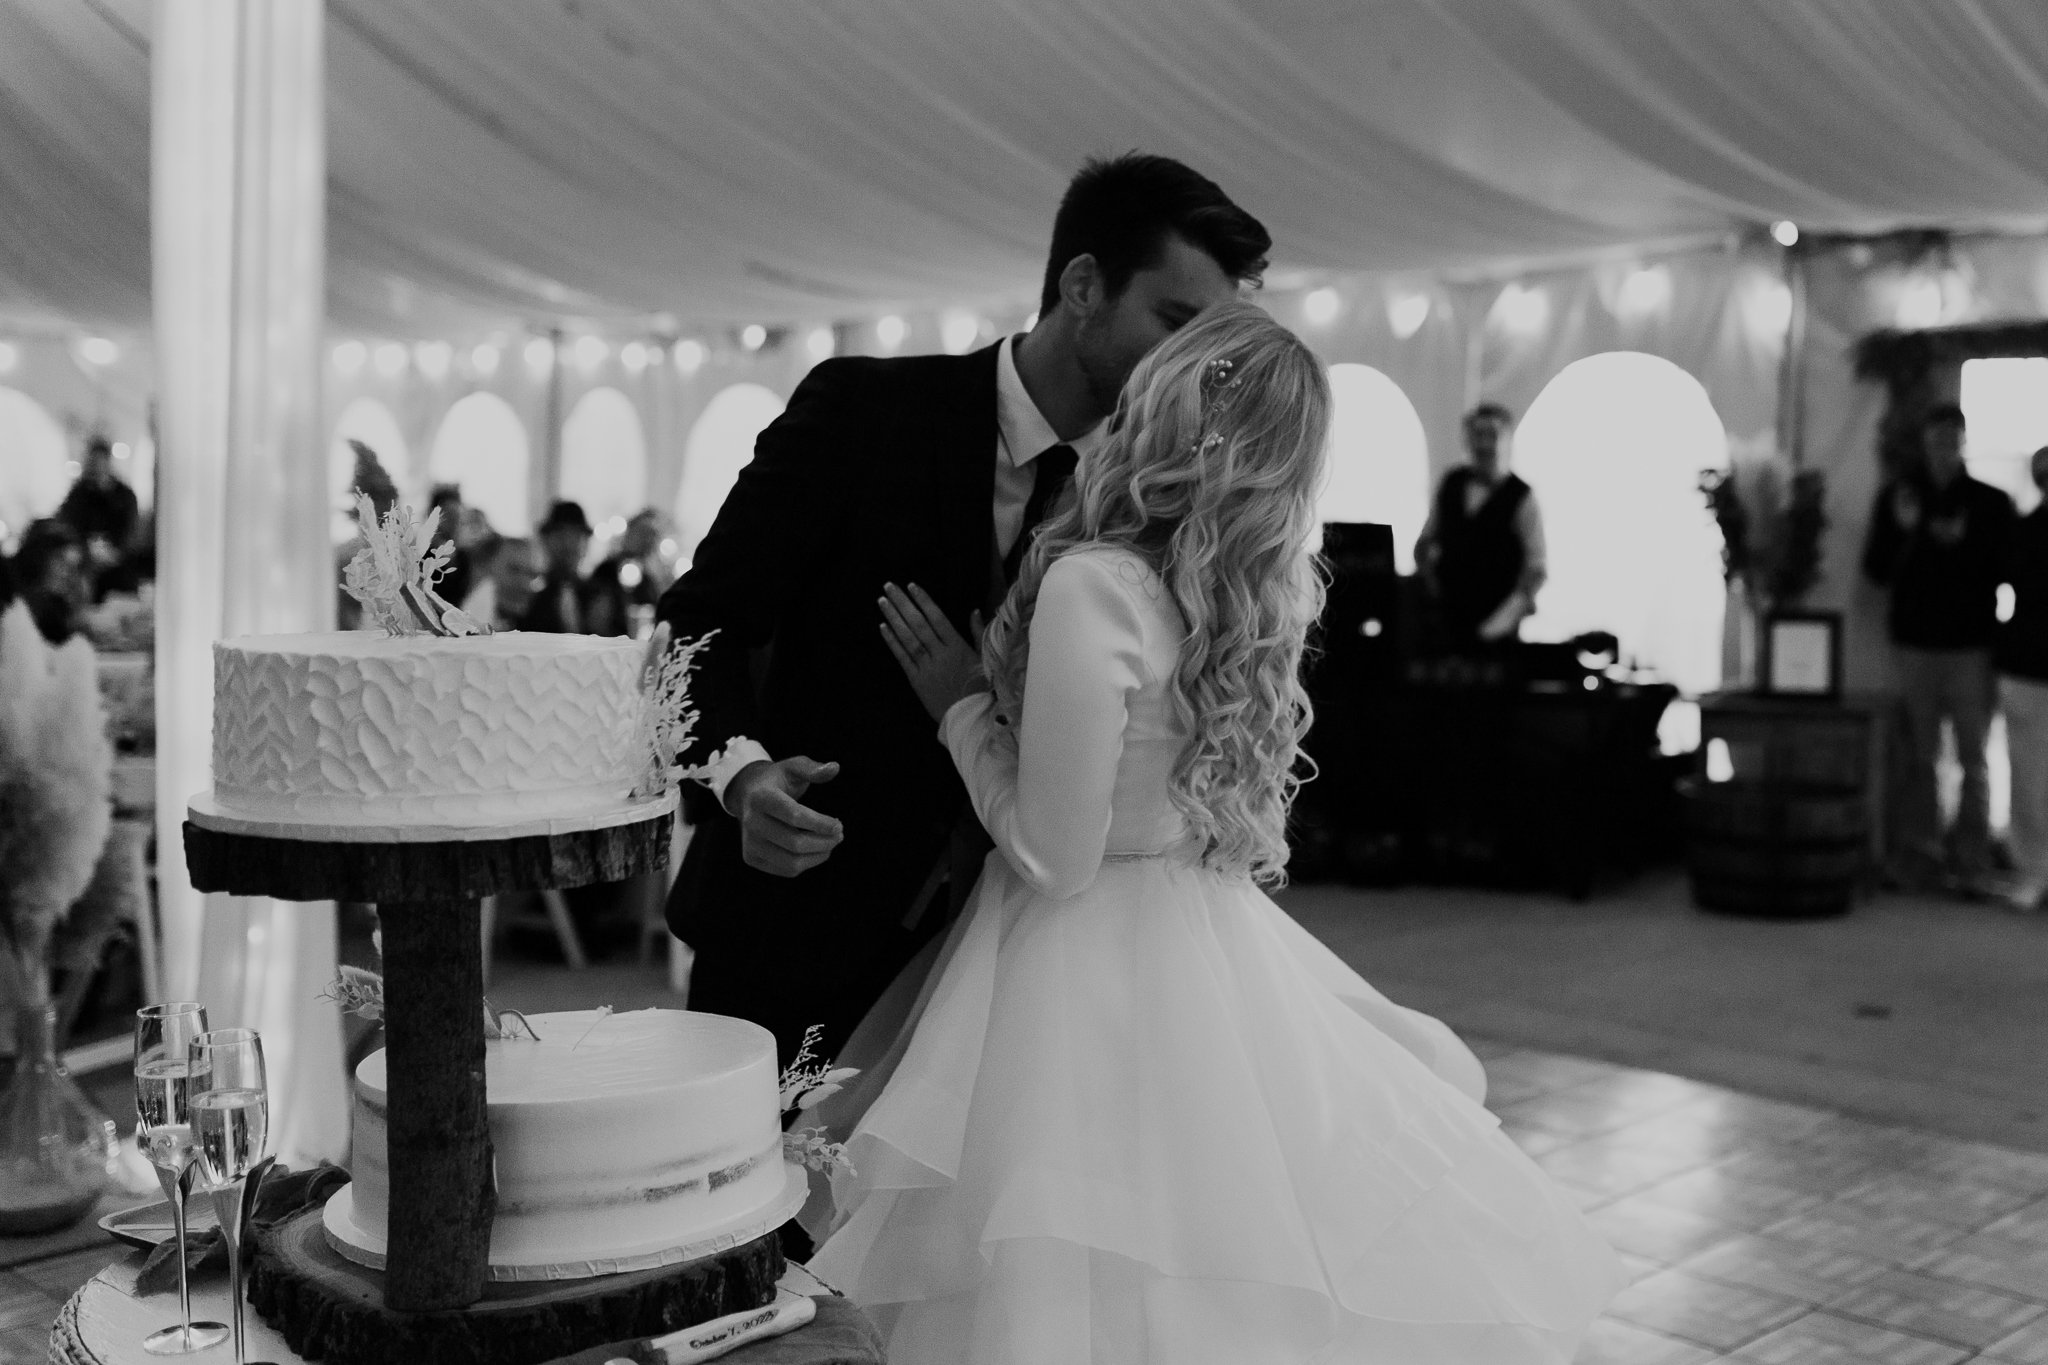 Bride and groom kiss in a white tent during their October wedding reception